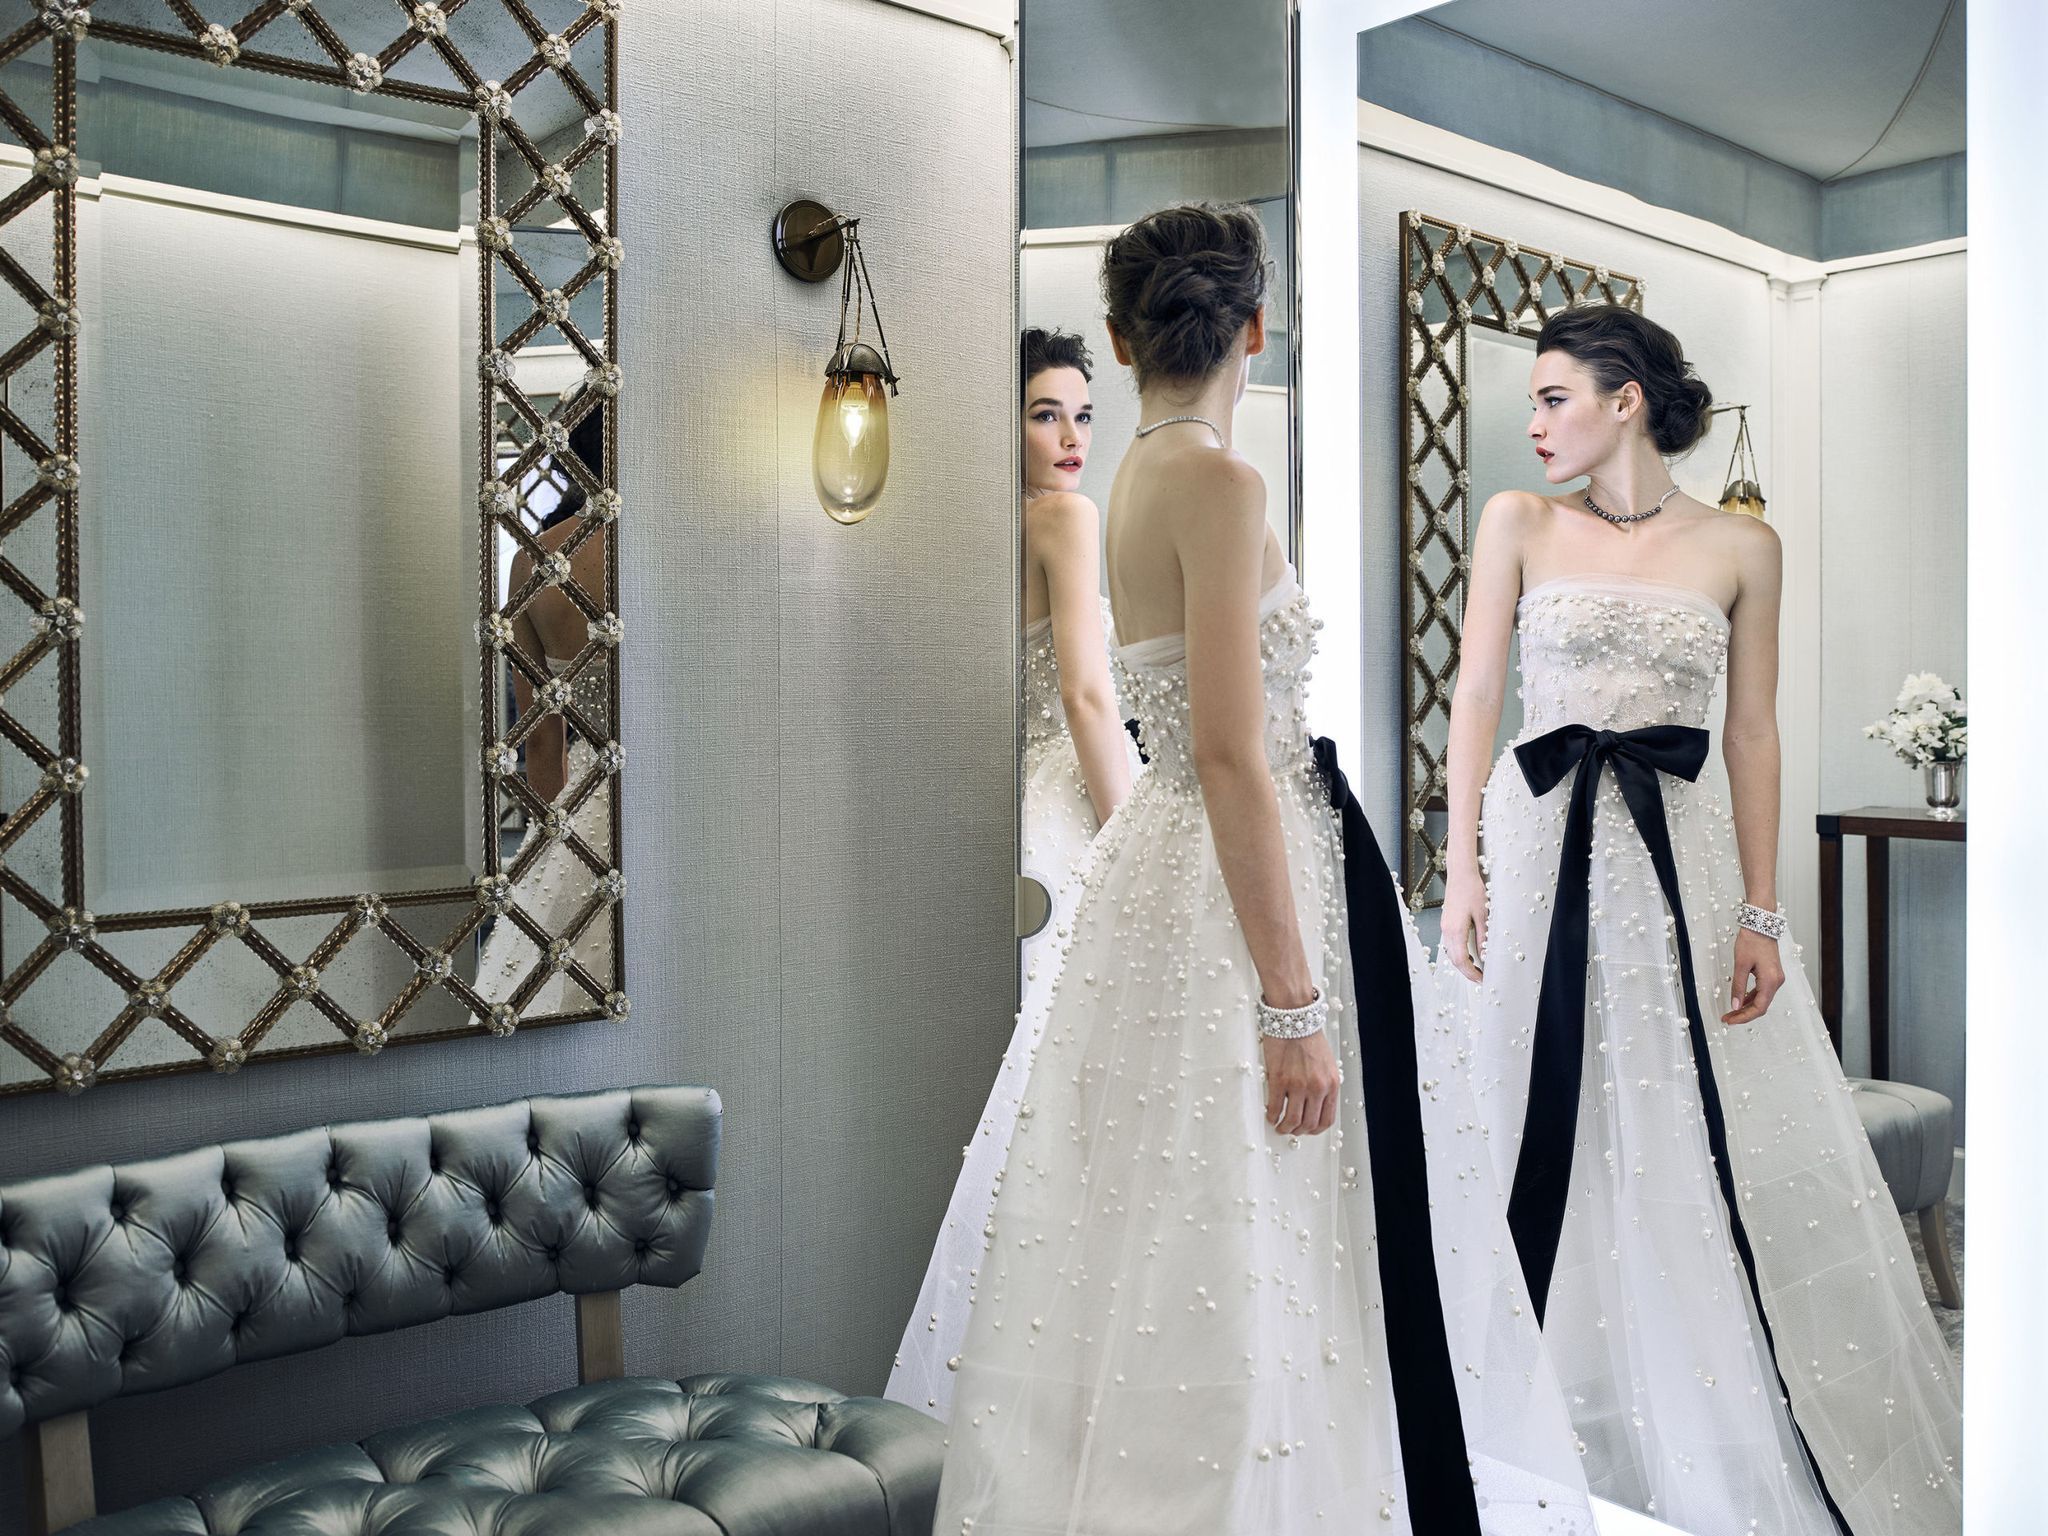 How To Choose The Perfect Wedding Dress?